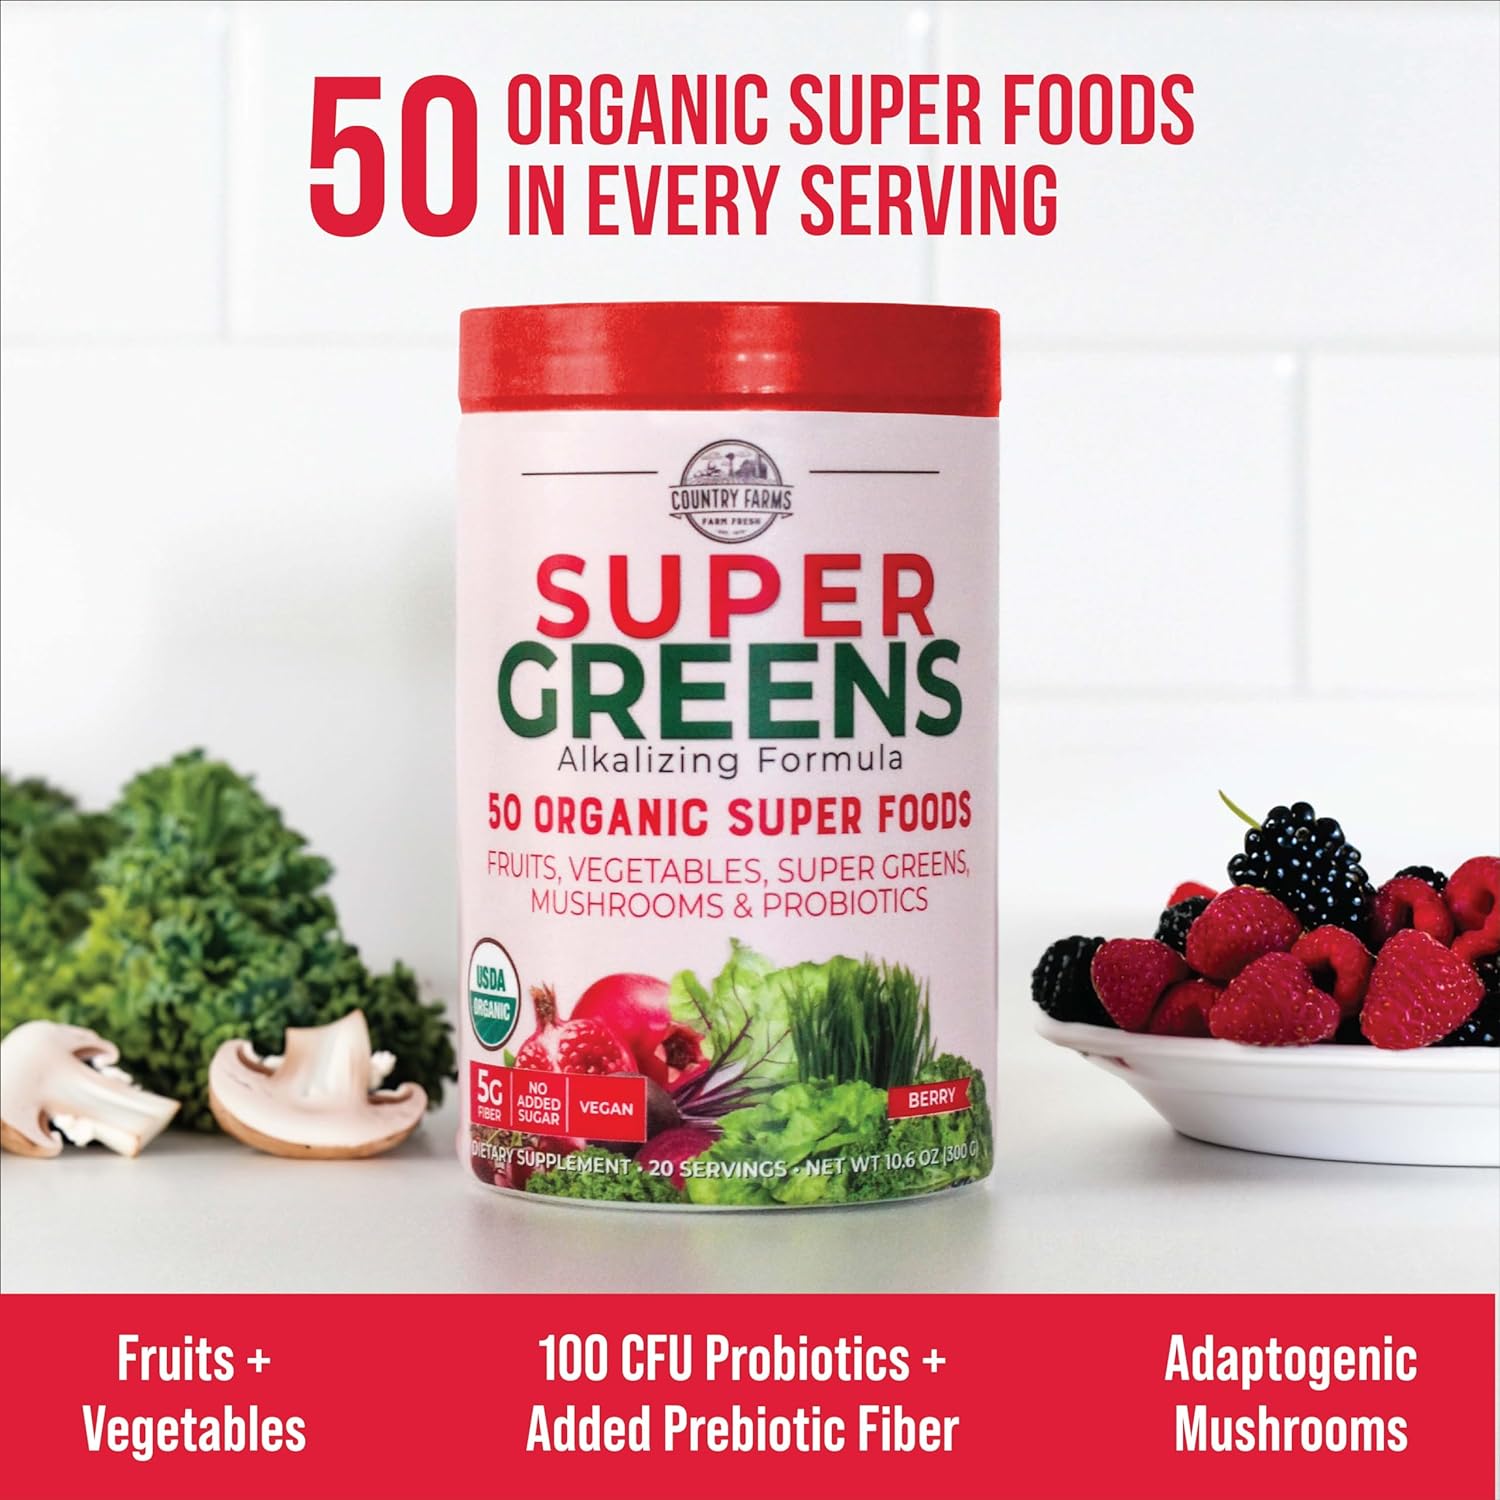 COUNTRY FARMS Super Greens Berry Flavor, 50 Organic Super Foods, USDA Organic Drink Mix, Fruits, Vegetables, Super Greens, Mushrooms & Probiotics, Supports Energy, 20 Servings, 10.6 Oz : Everything Else